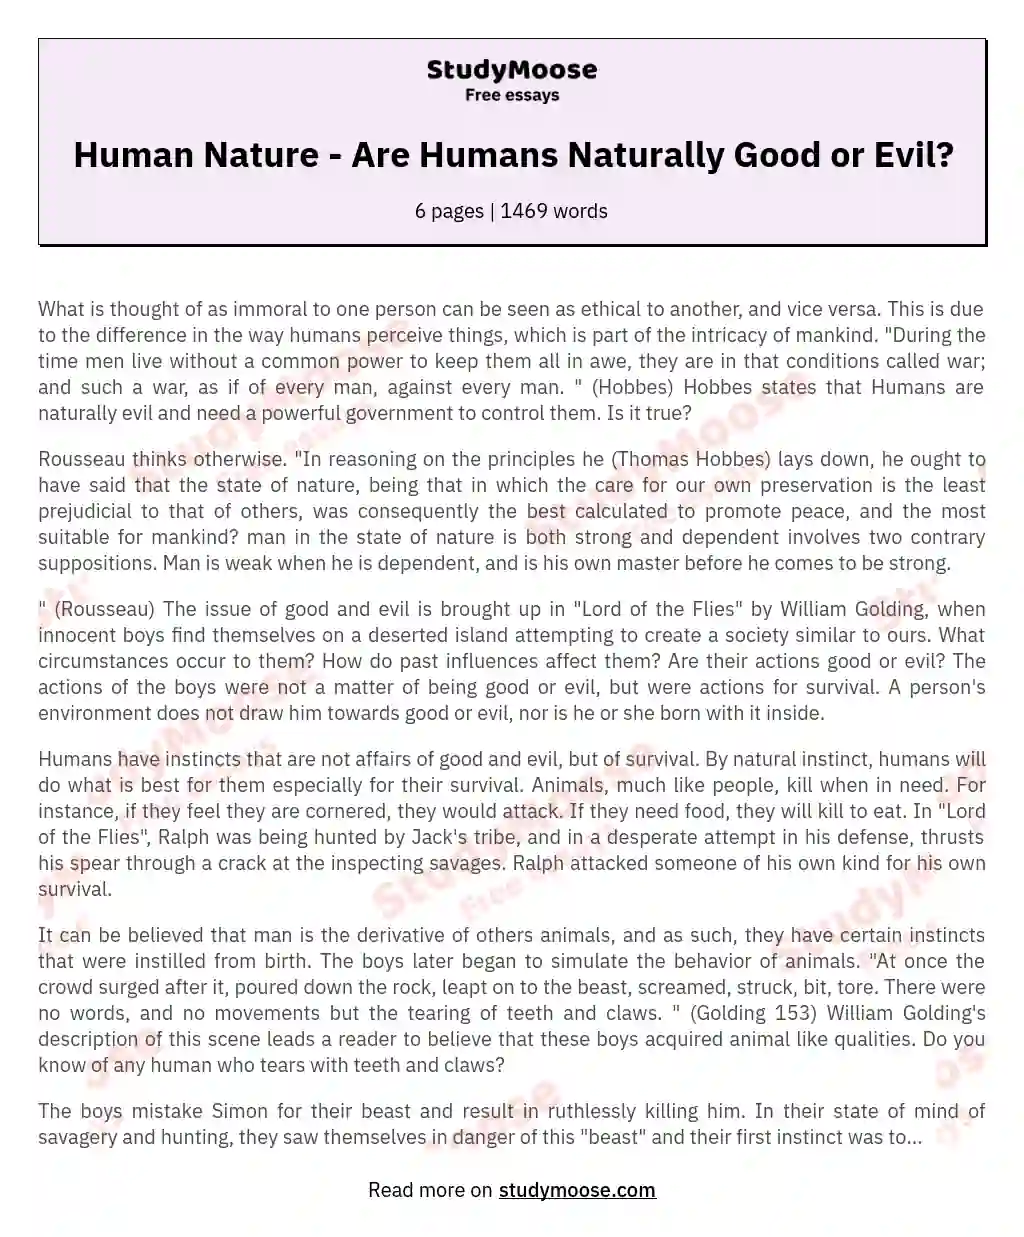 Human Nature - Are Humans Naturally Good or Evil?